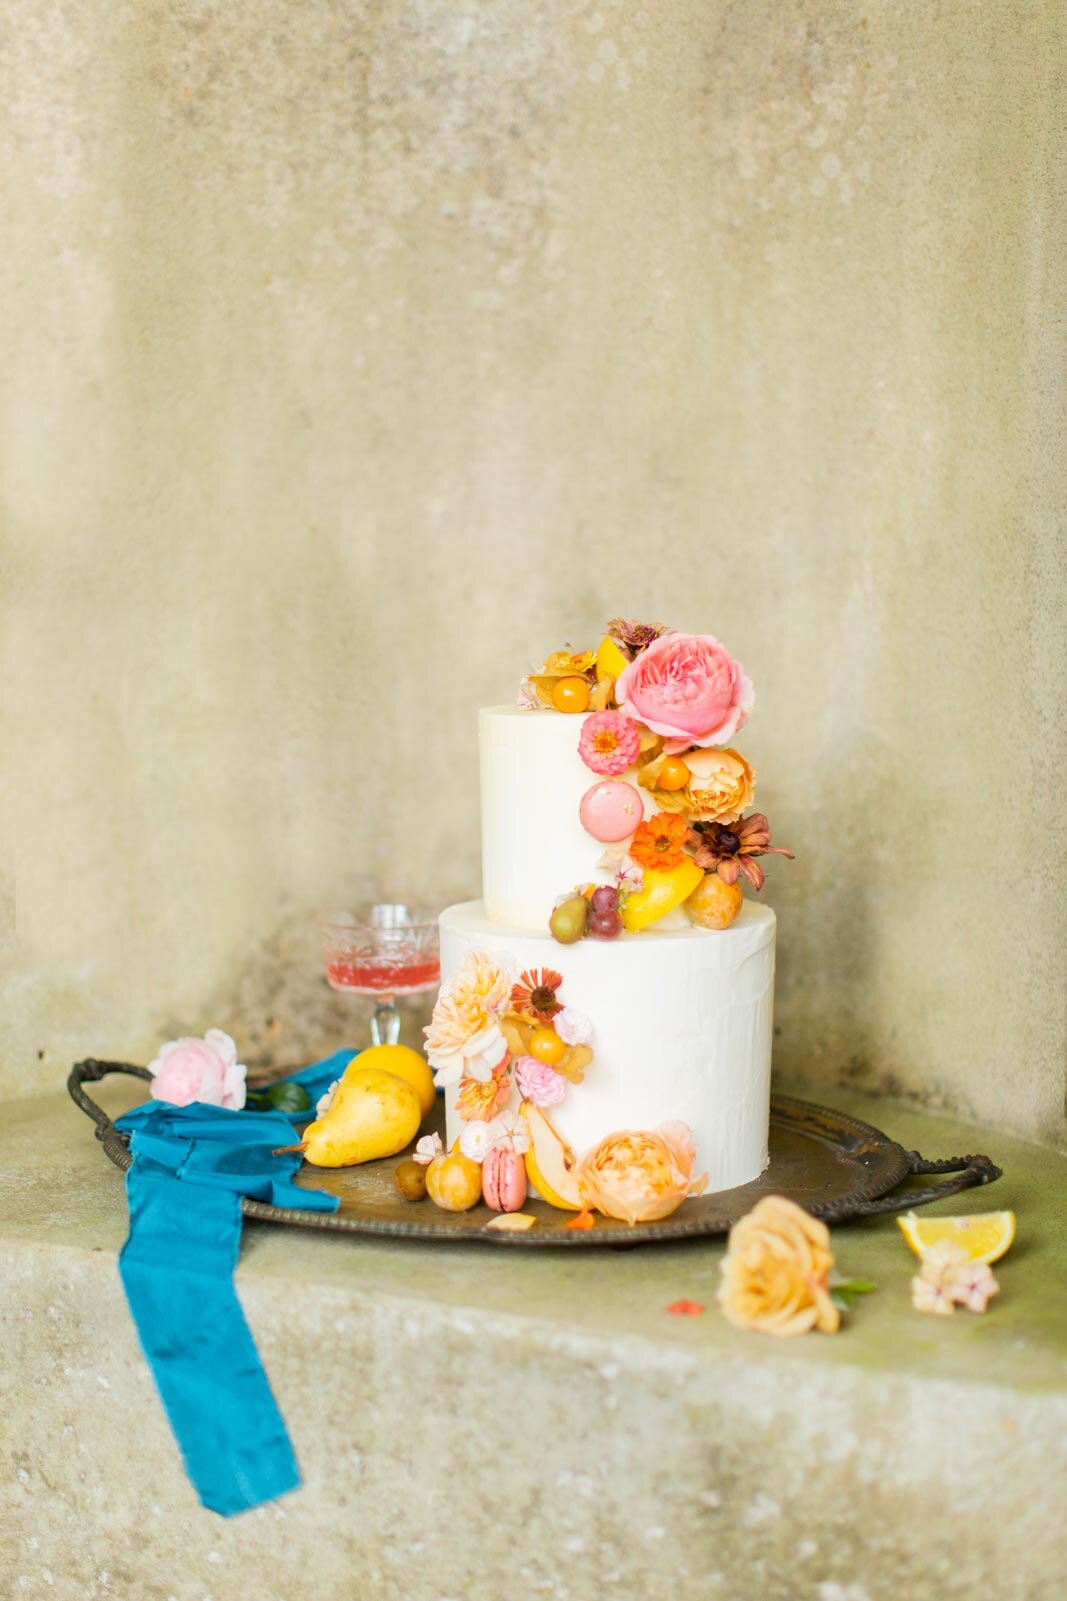 romantic-buttercream-cake-with-cascading-floral-and-fruit-decorations.jpg